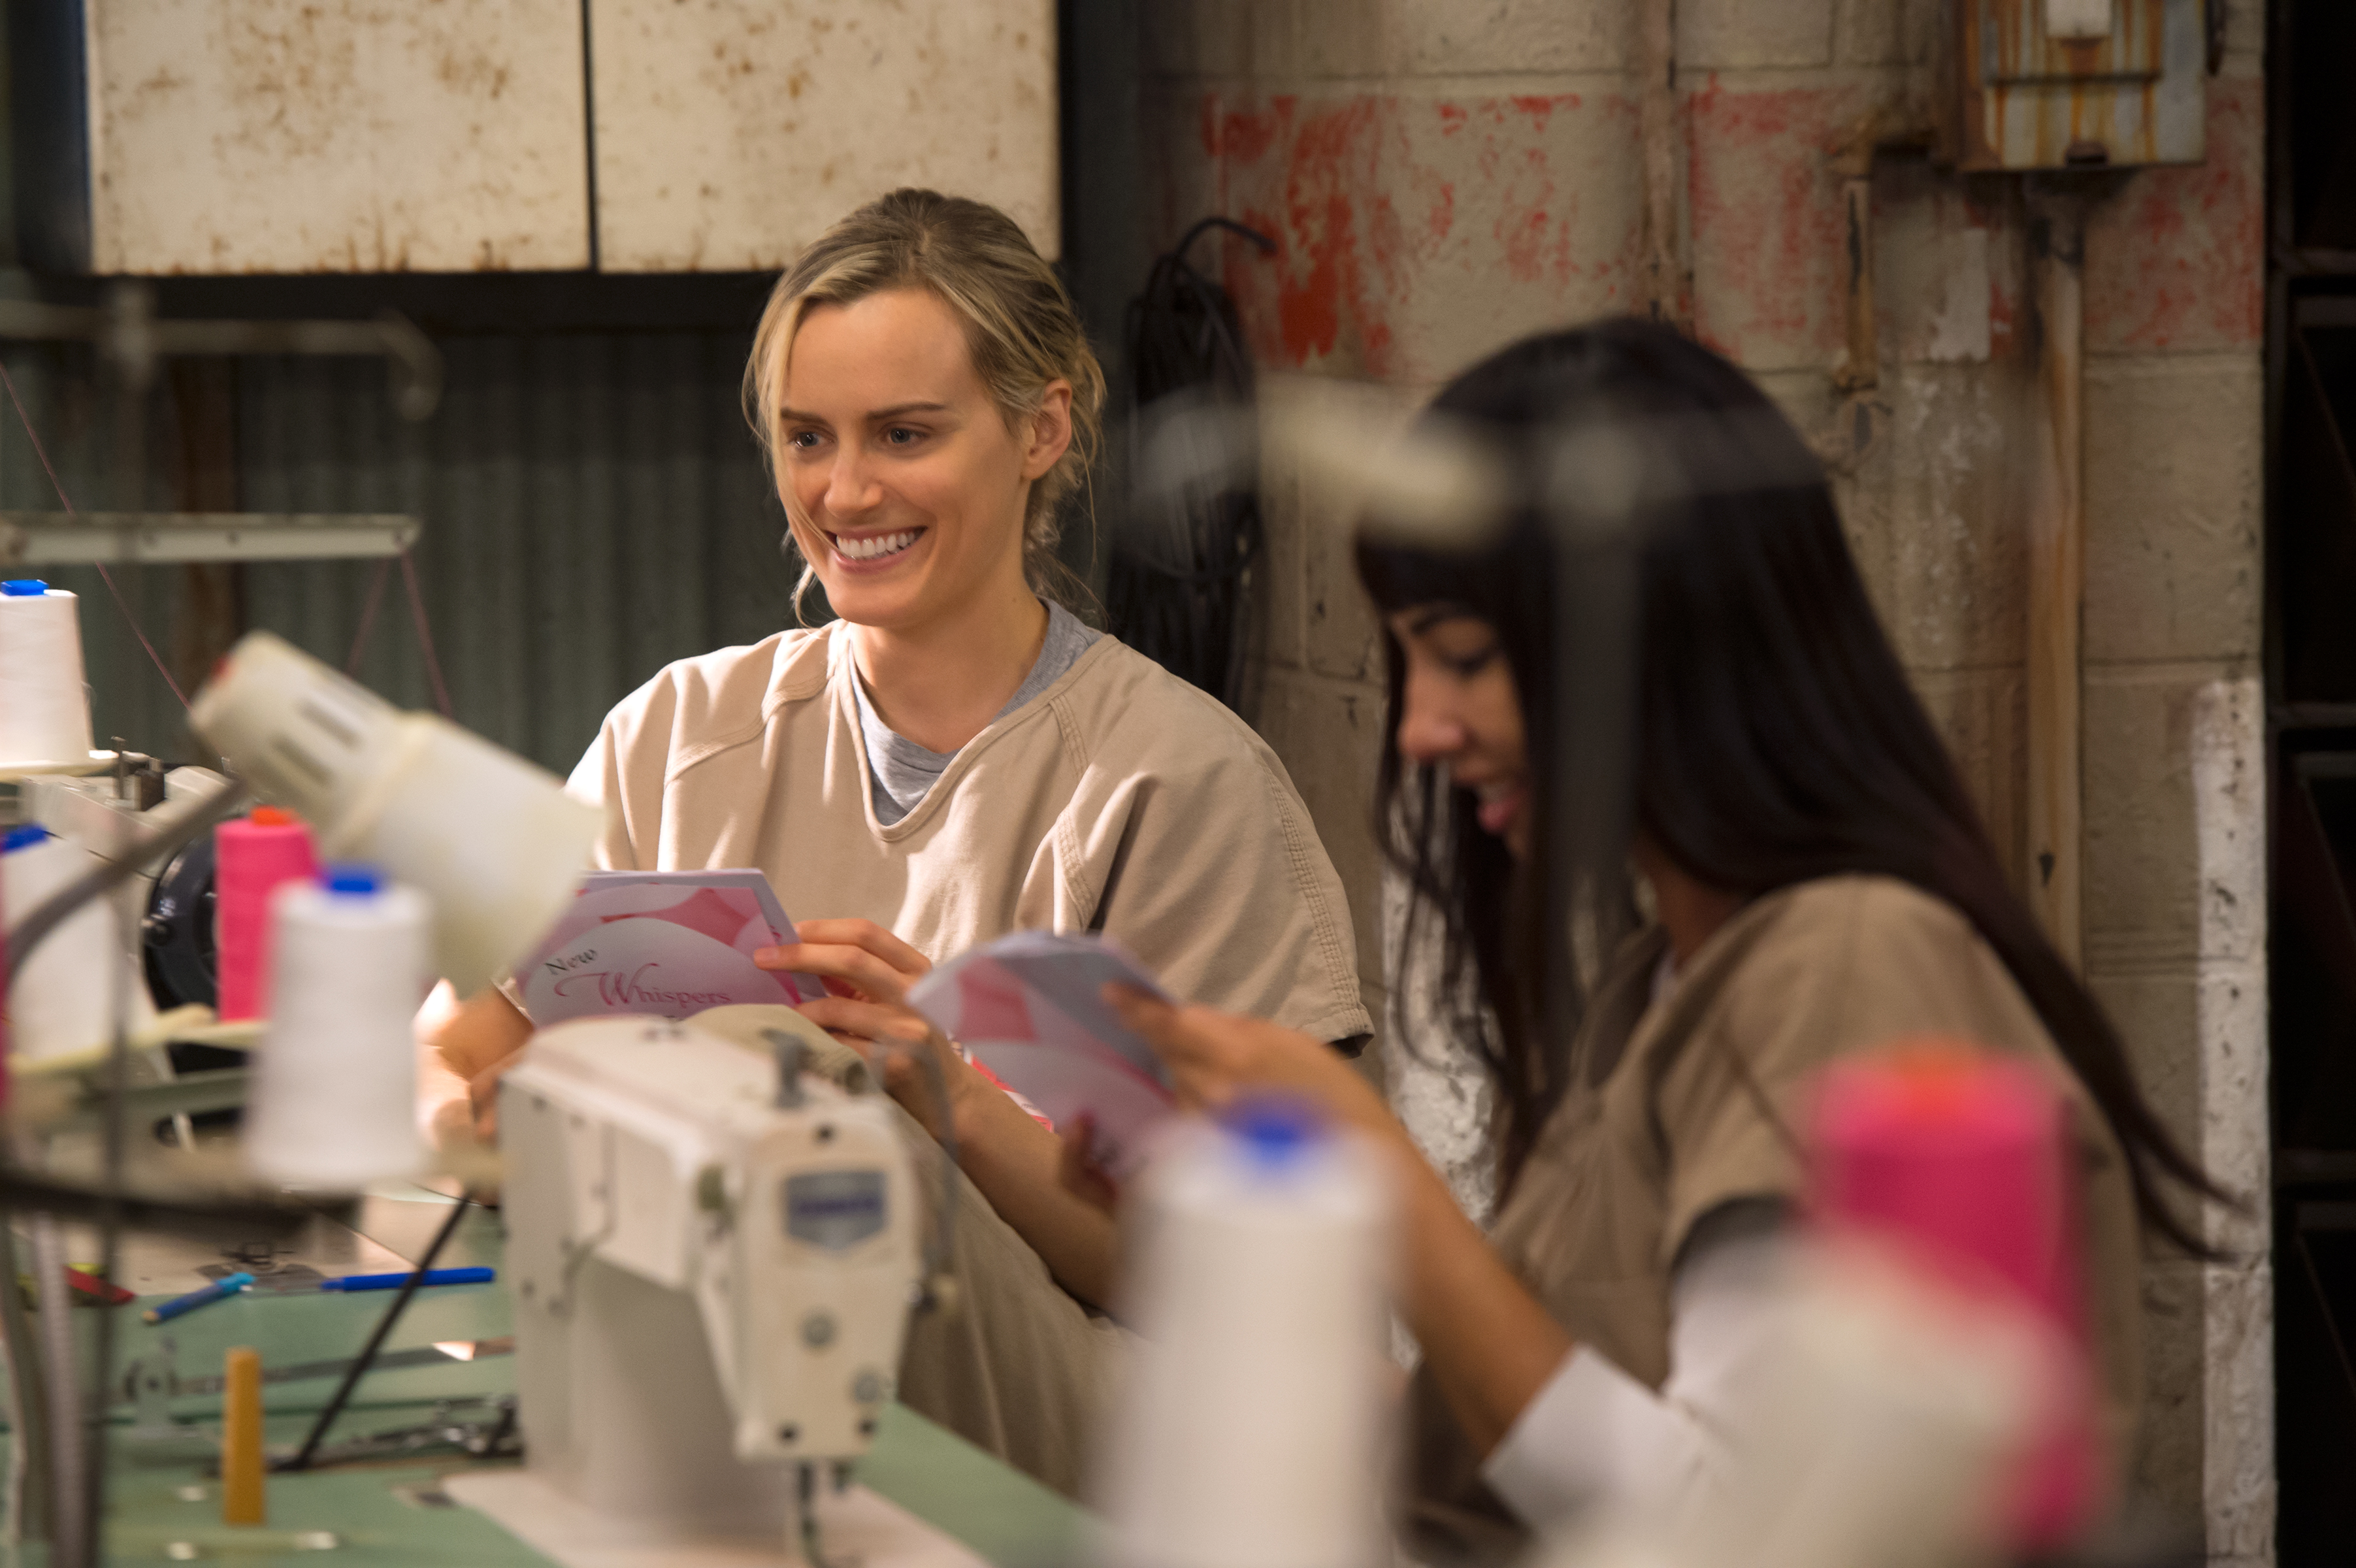 Still of Taylor Schilling and Jackie Cruz in Orange Is the New Black (2013)